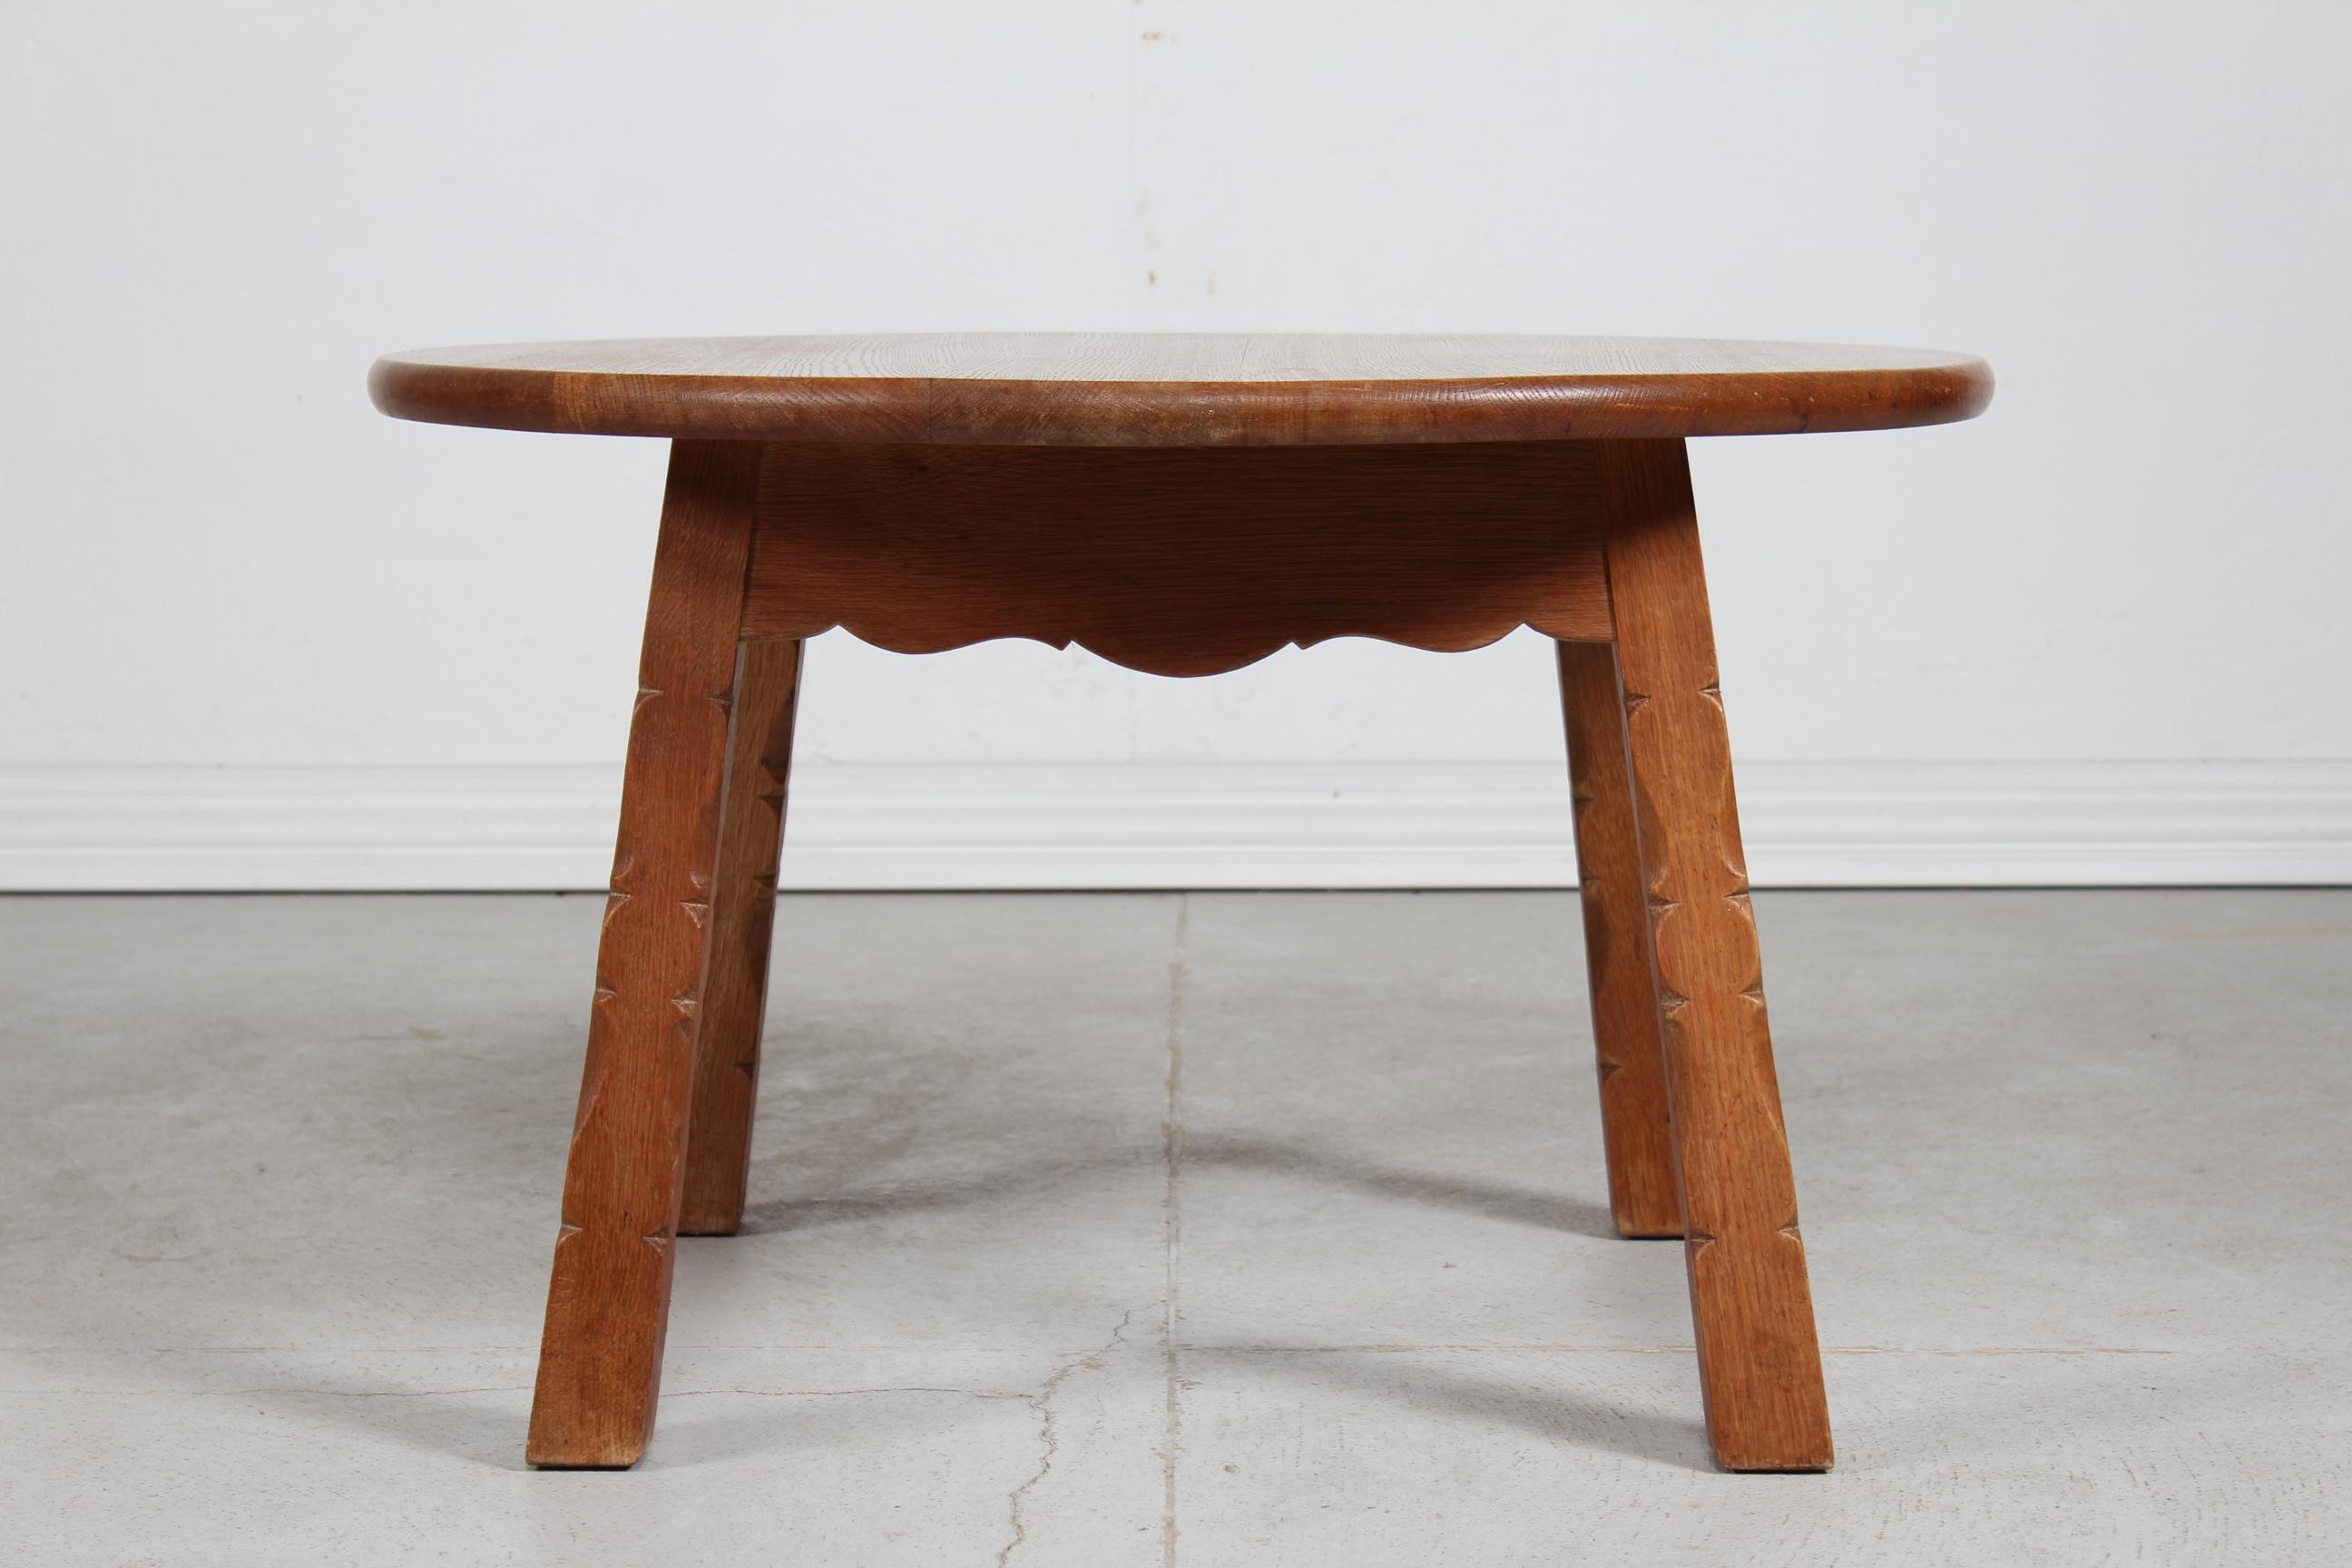 Round coffee table of heavy solid oak in the style of the designers as Henning Kjærnulf and Axel Einar Hjorth
Brutalist style with carved legs and wavy table rim.
Handmade by a danish cabinetmaker in the 1950s

Measures: Diameter 90 cm
Height 55.5